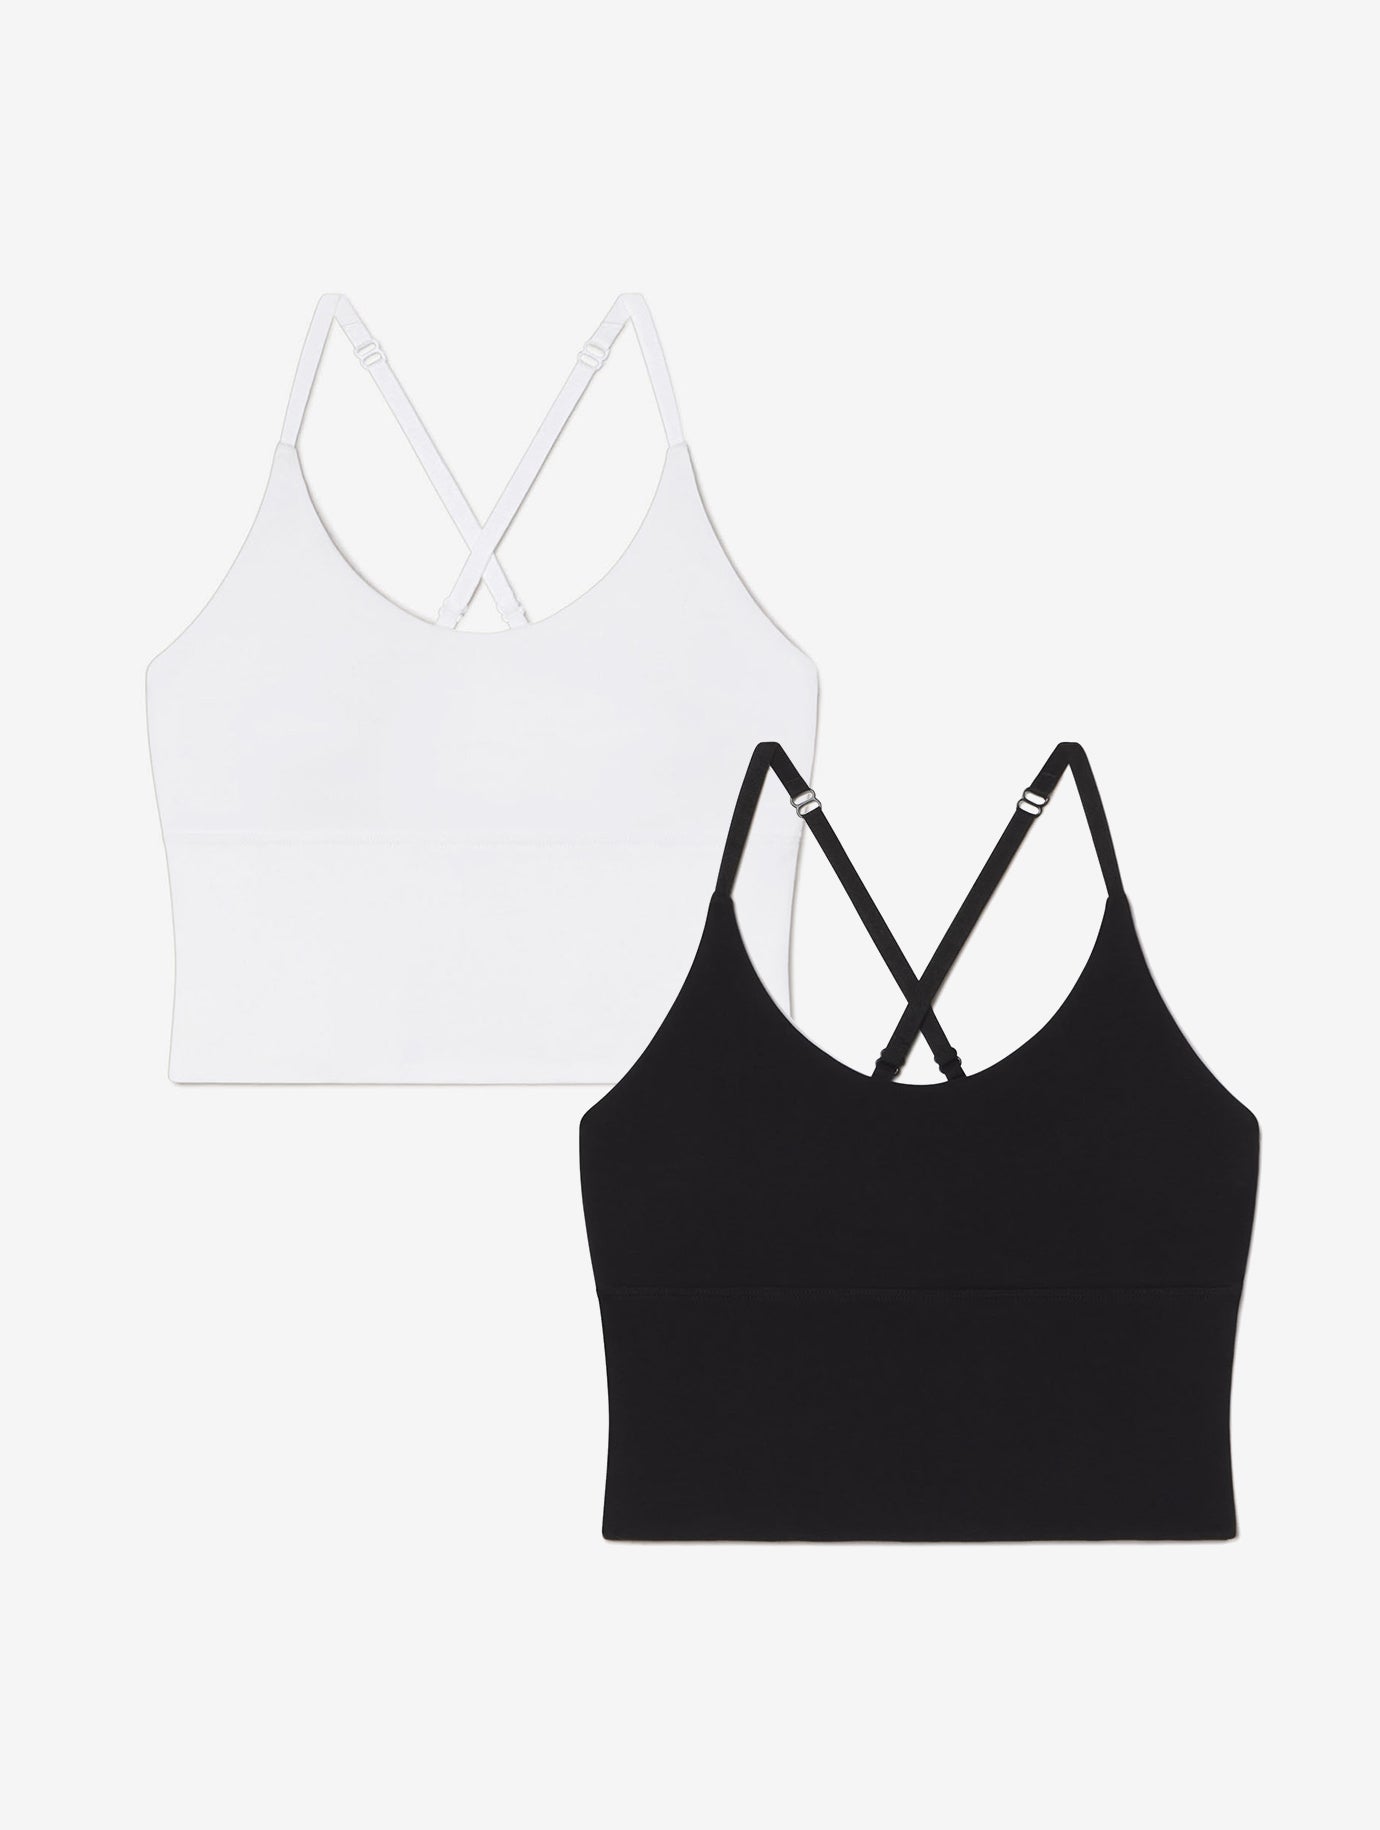 Women's Cute Camisole Tops with Built in Bra V Ghana